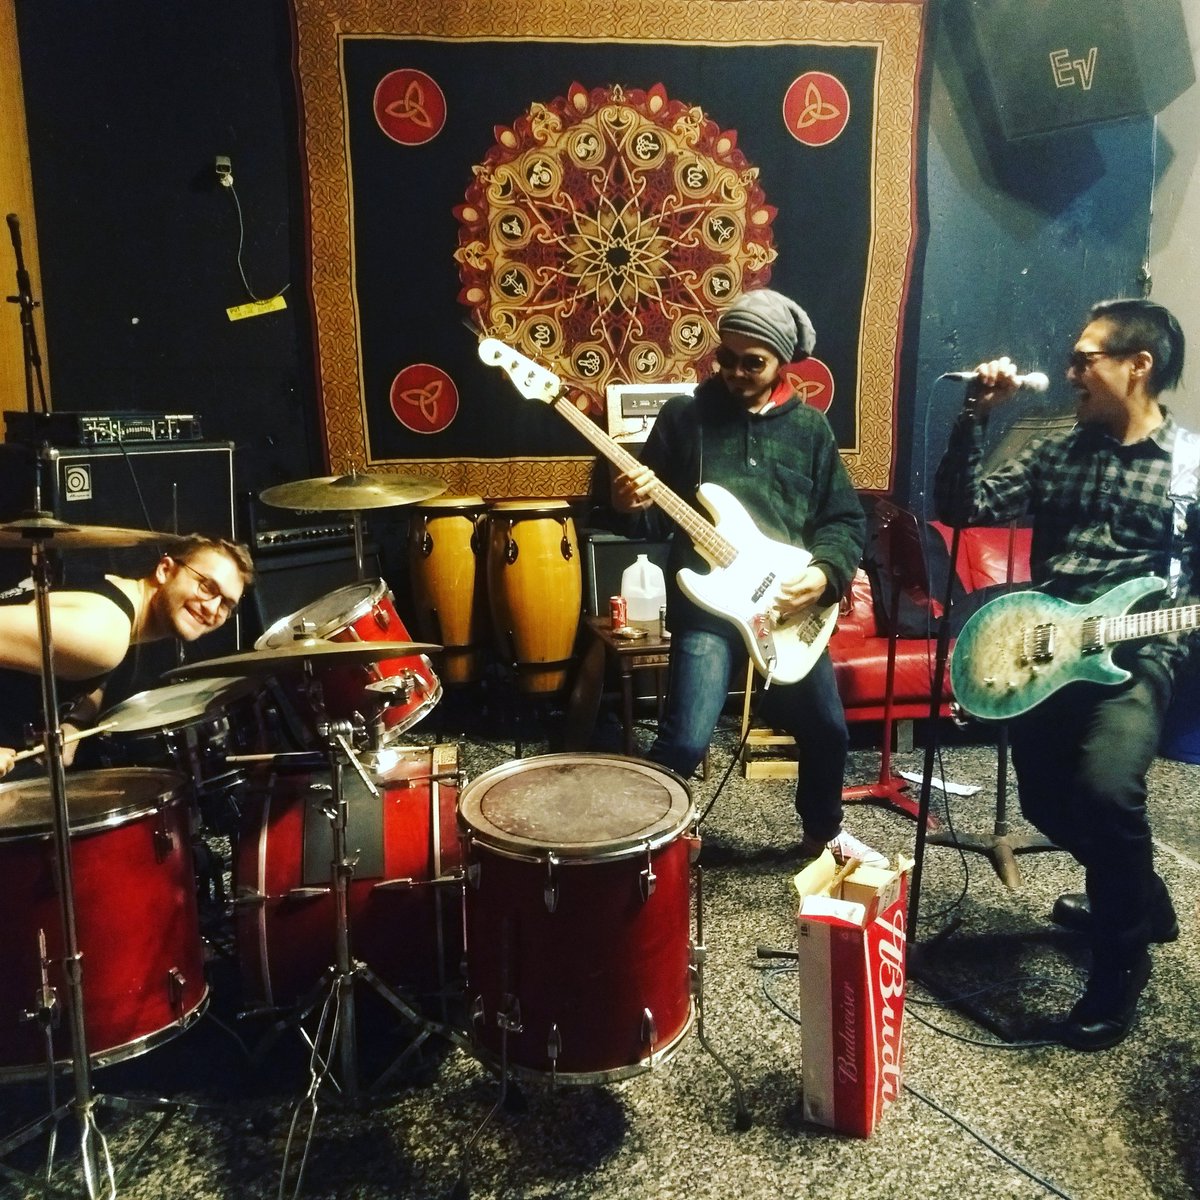 The boys in the studio, all wearing shades except Jake 

#BluesBrothers #PunkRock #WritingSongs #Block6 #CoolRug #NewShitToCome